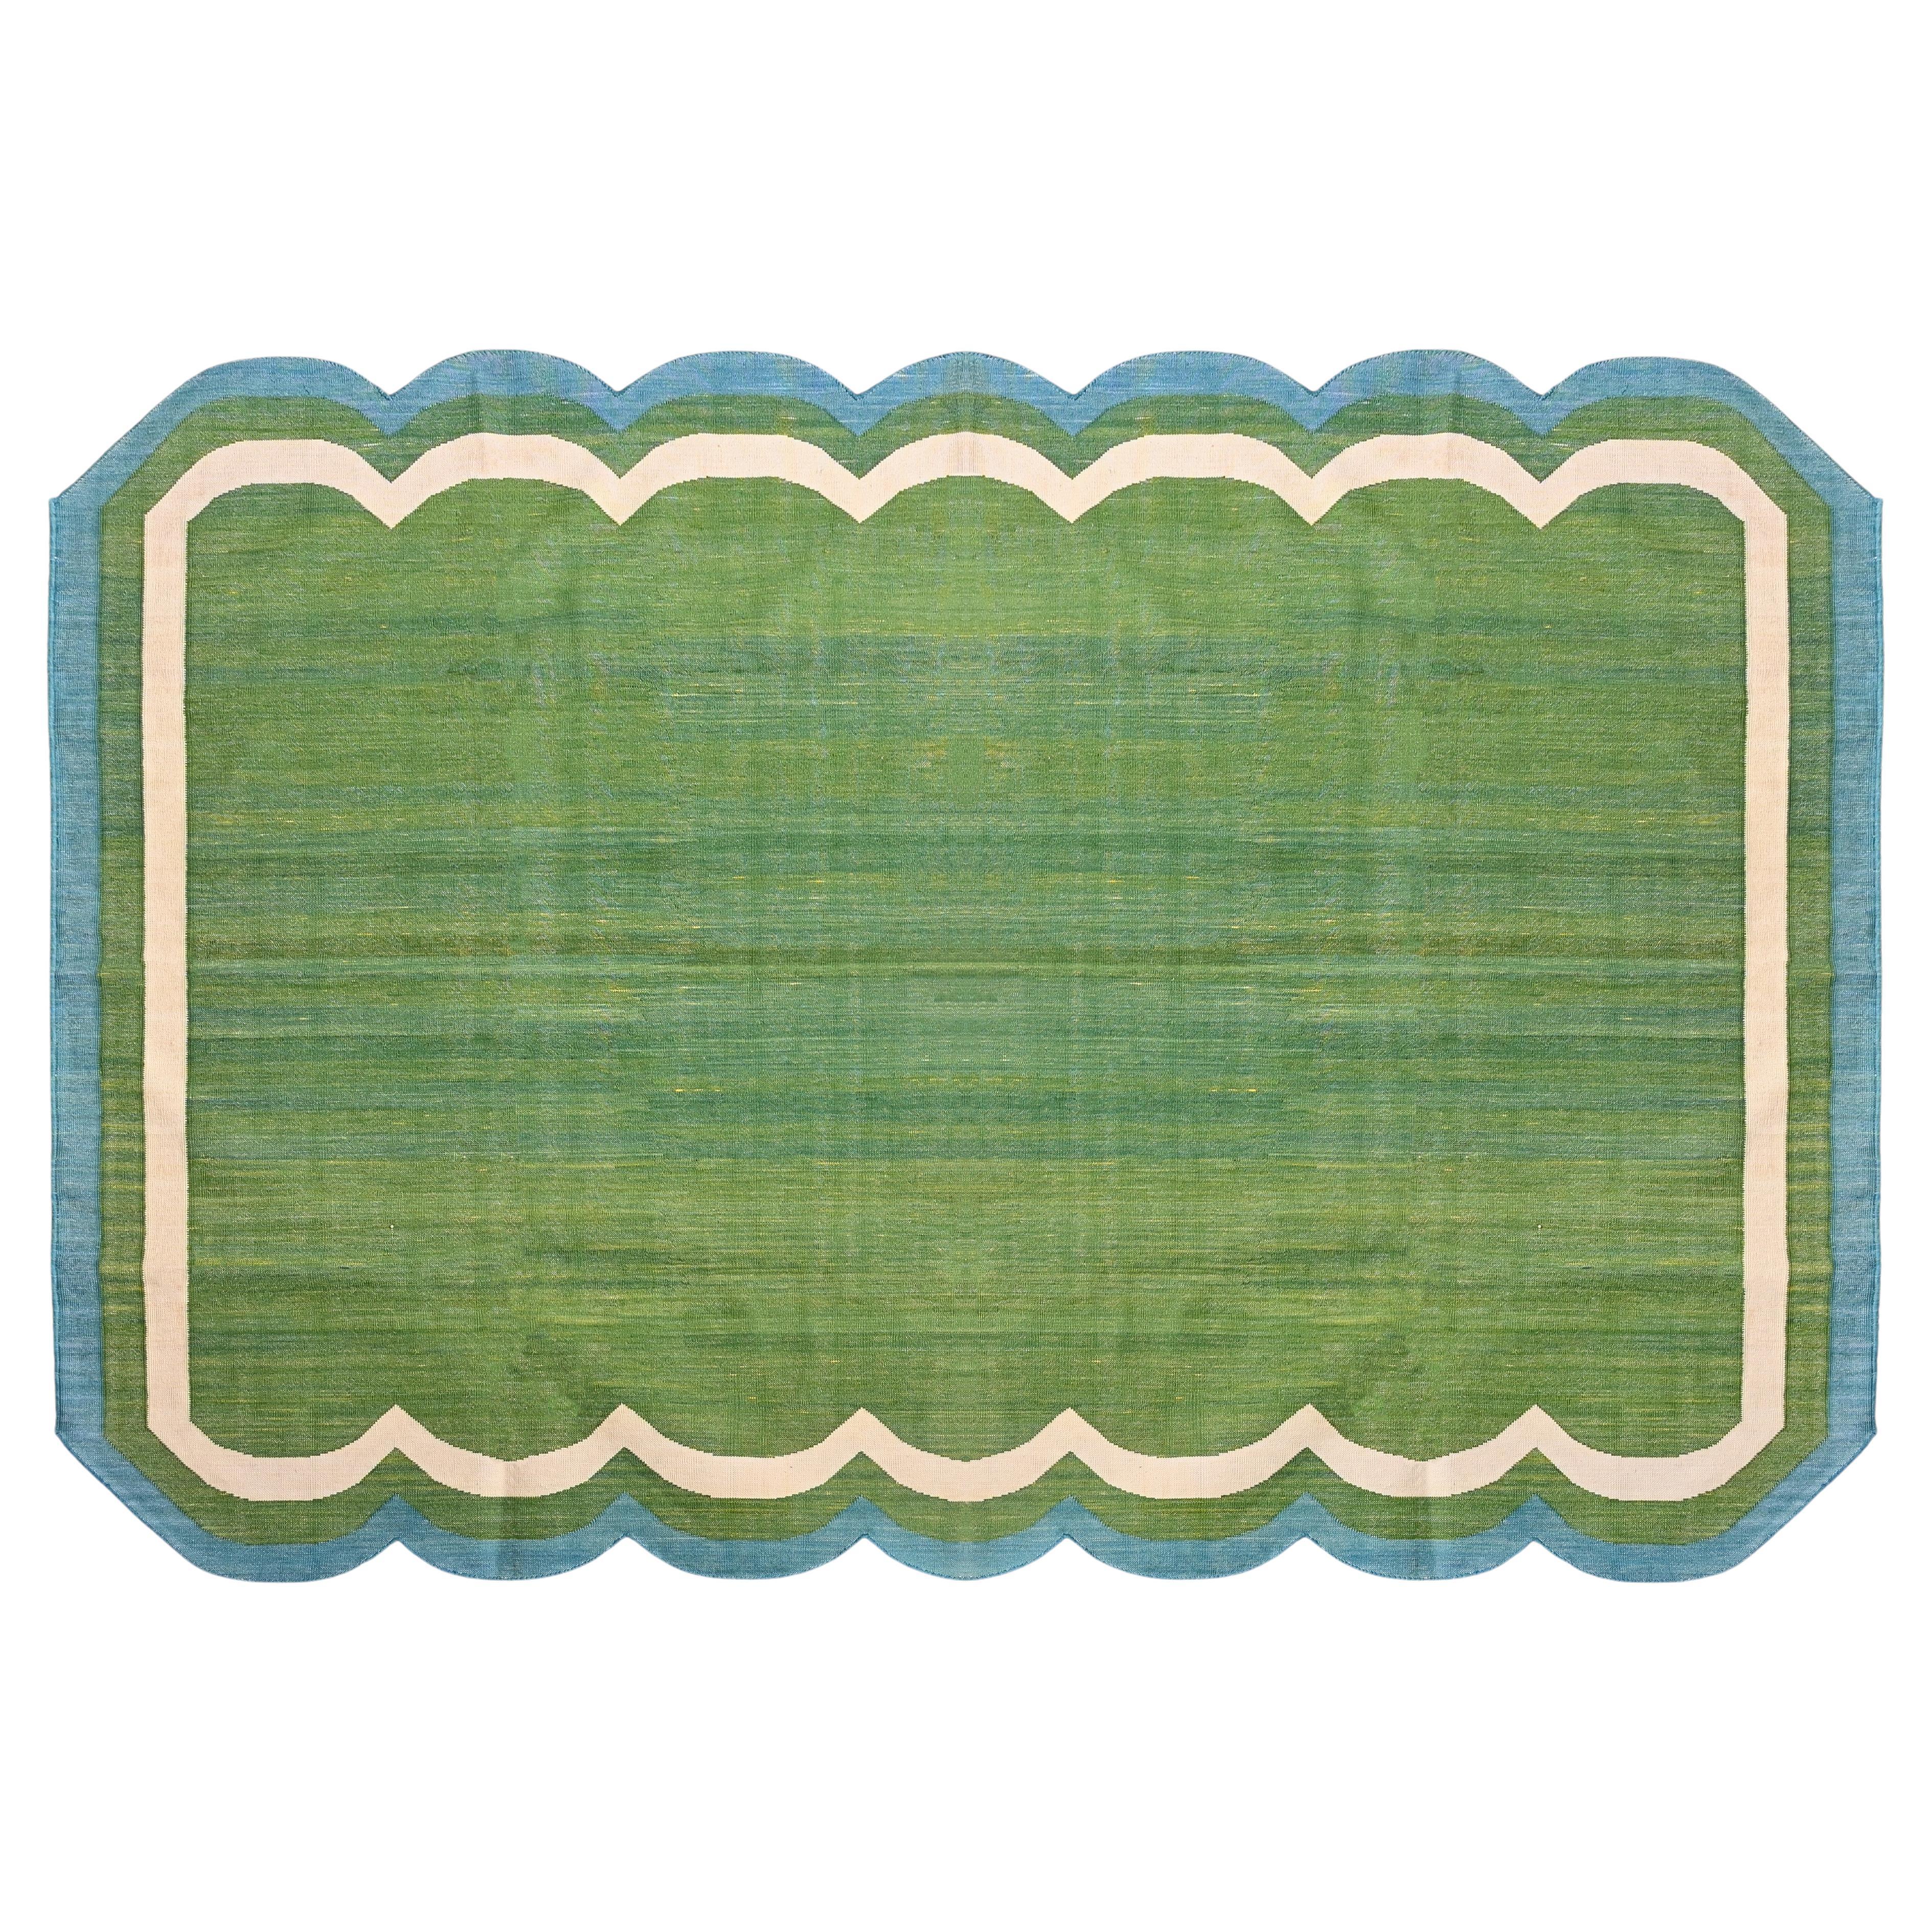 Handmade Cotton Area Flat Weave Rug, 6x9 Green And Blue Scalloped Kilim Dhurrie